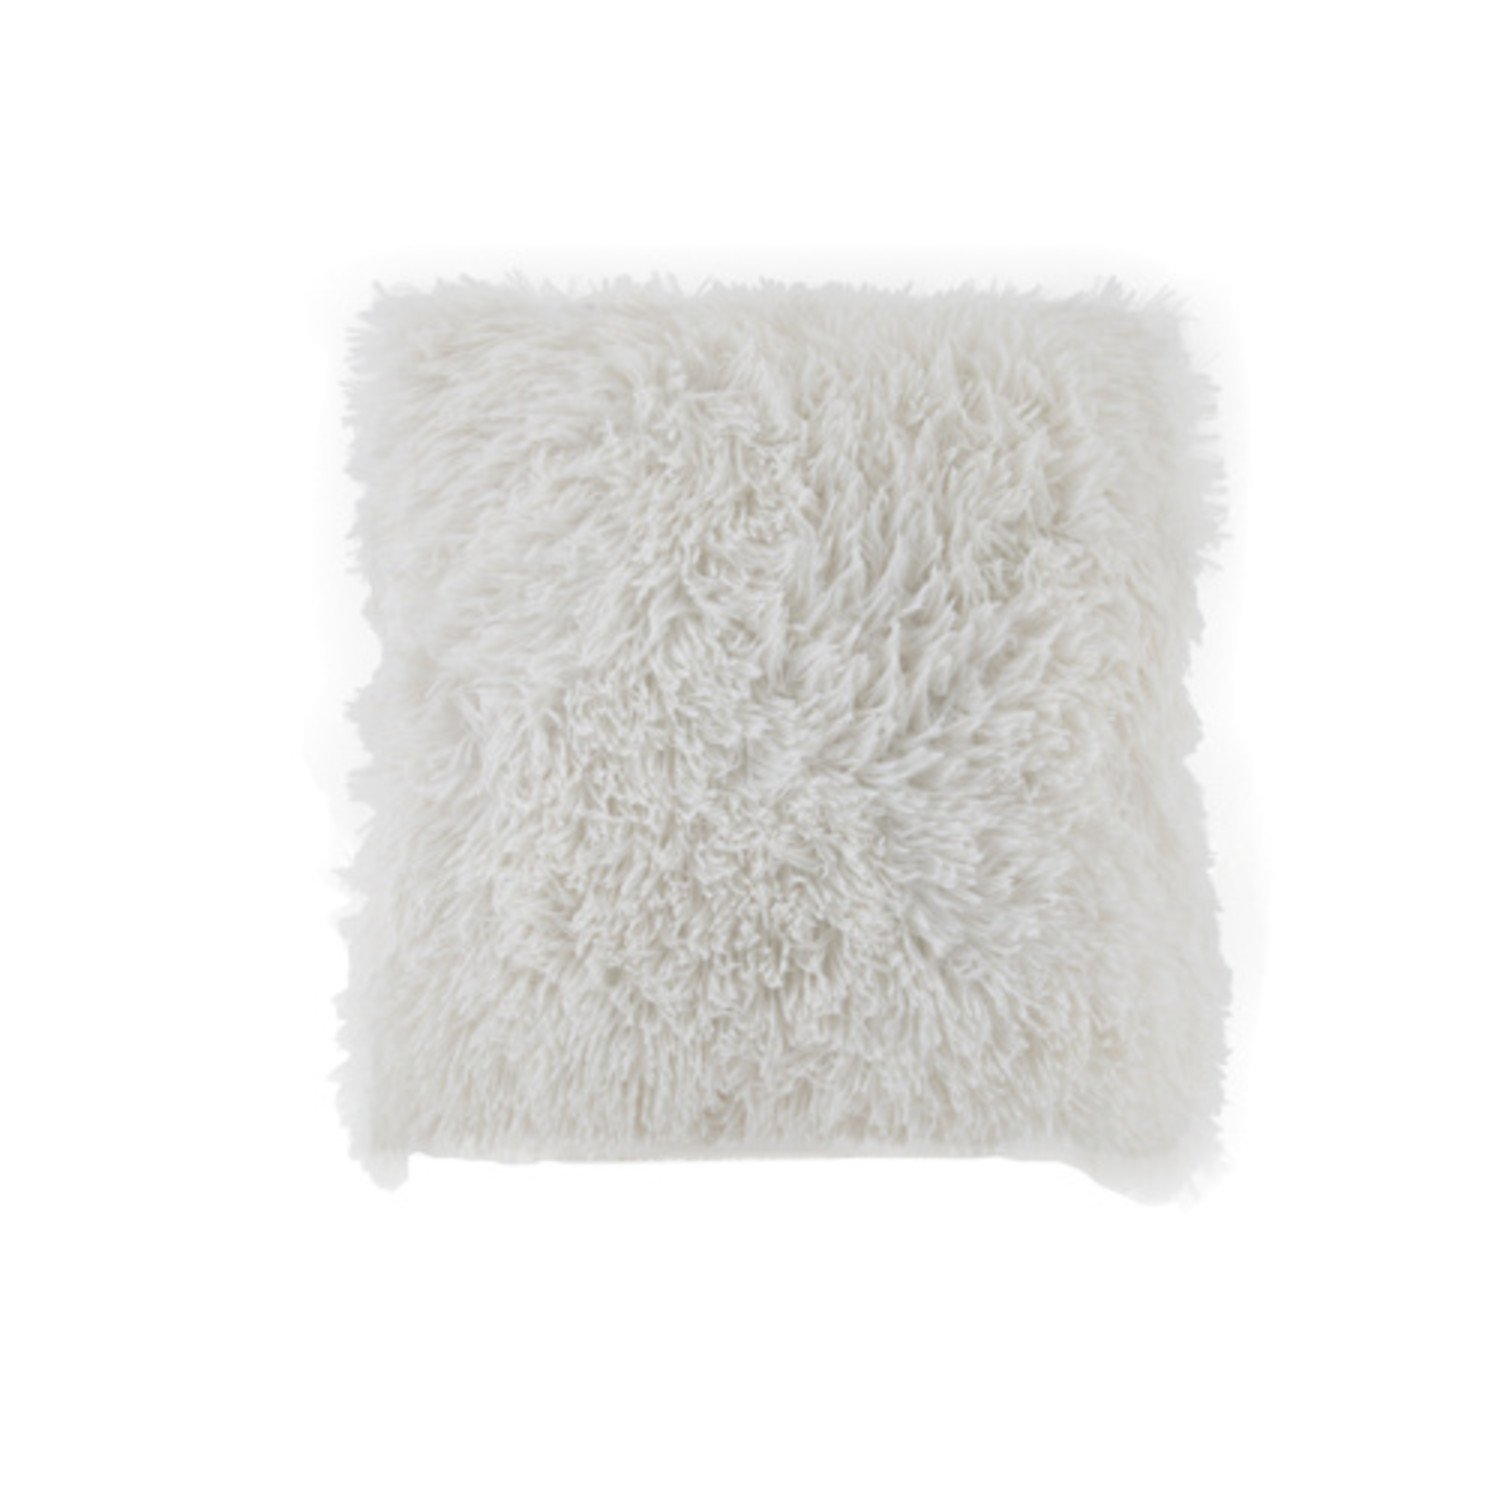 Rechtsaf groep metaal Cosy at Home Comfortabel fluffy Kussen in wit - Homecompanyshop.nl